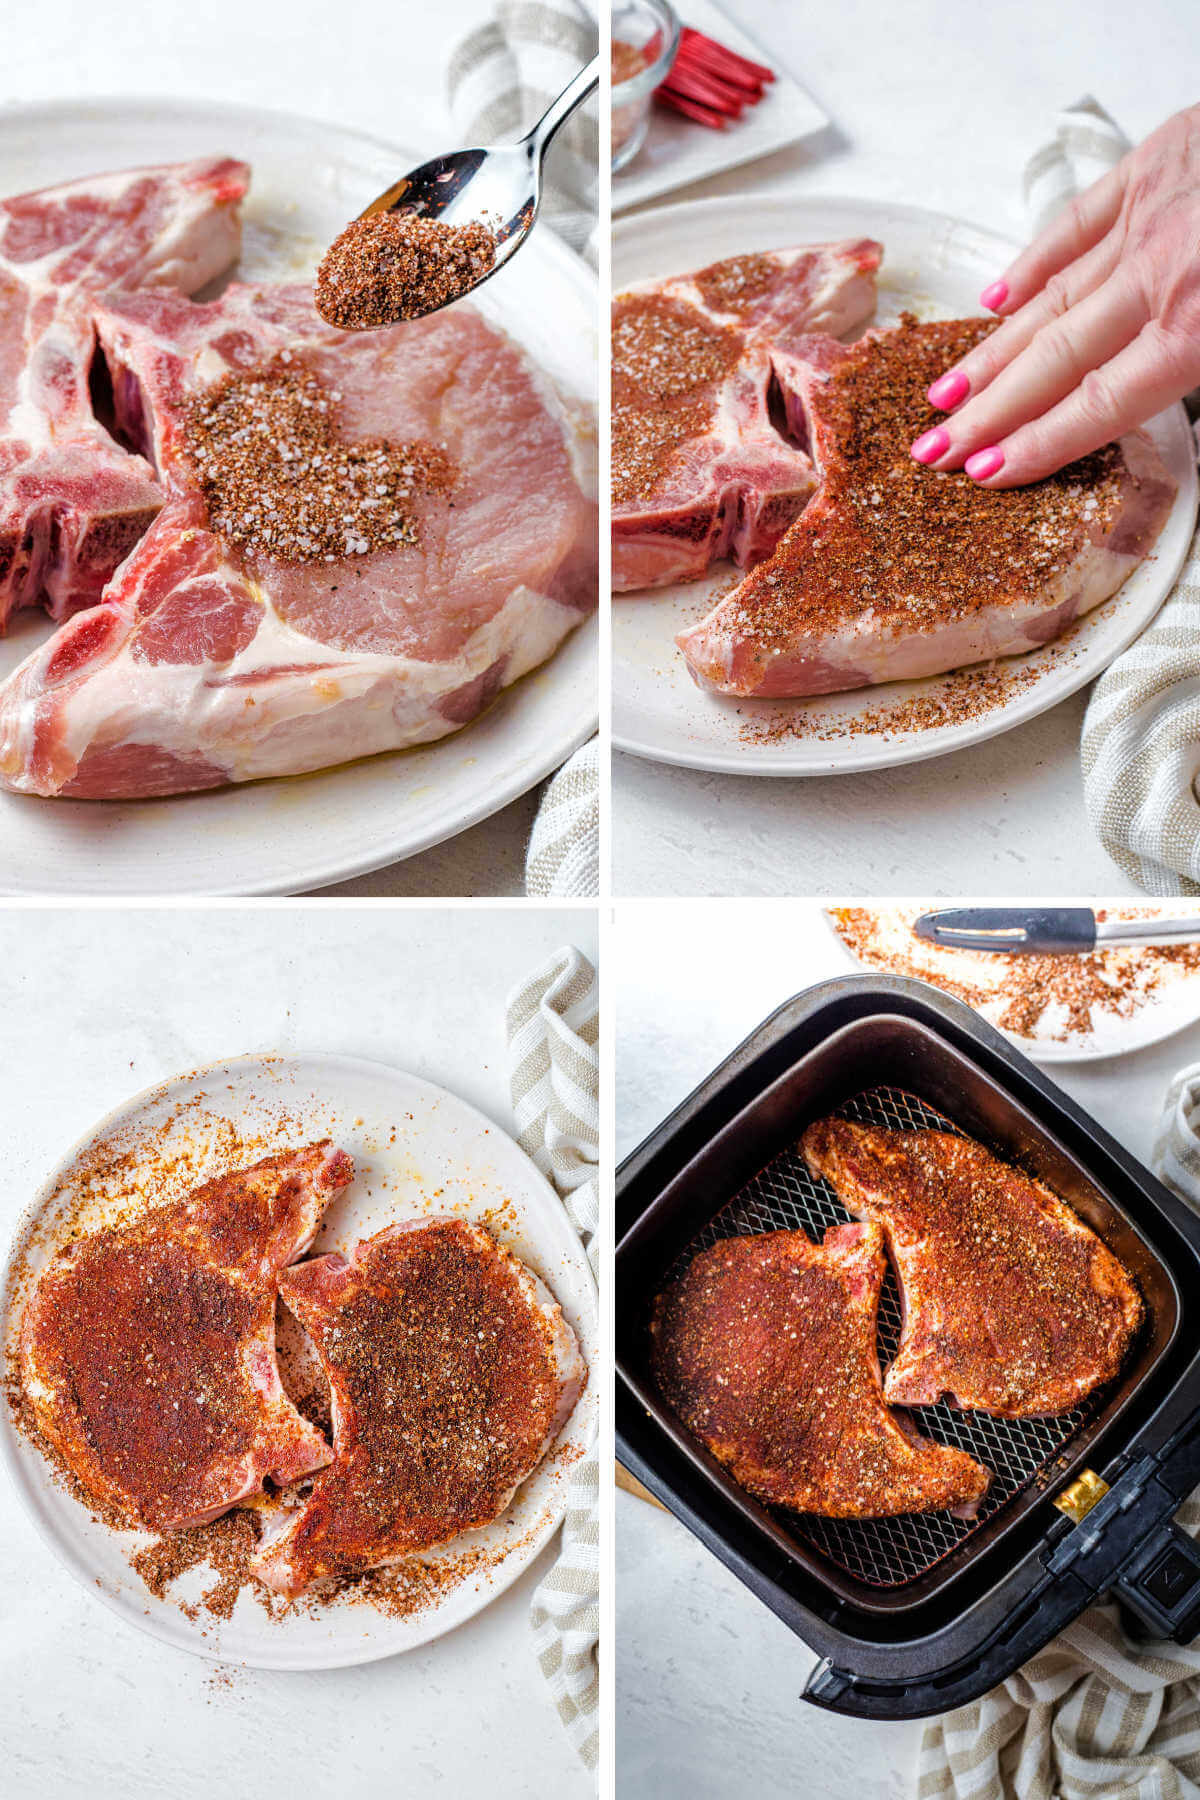 rubbing spices onto pork chops for cooking in an air fryer.